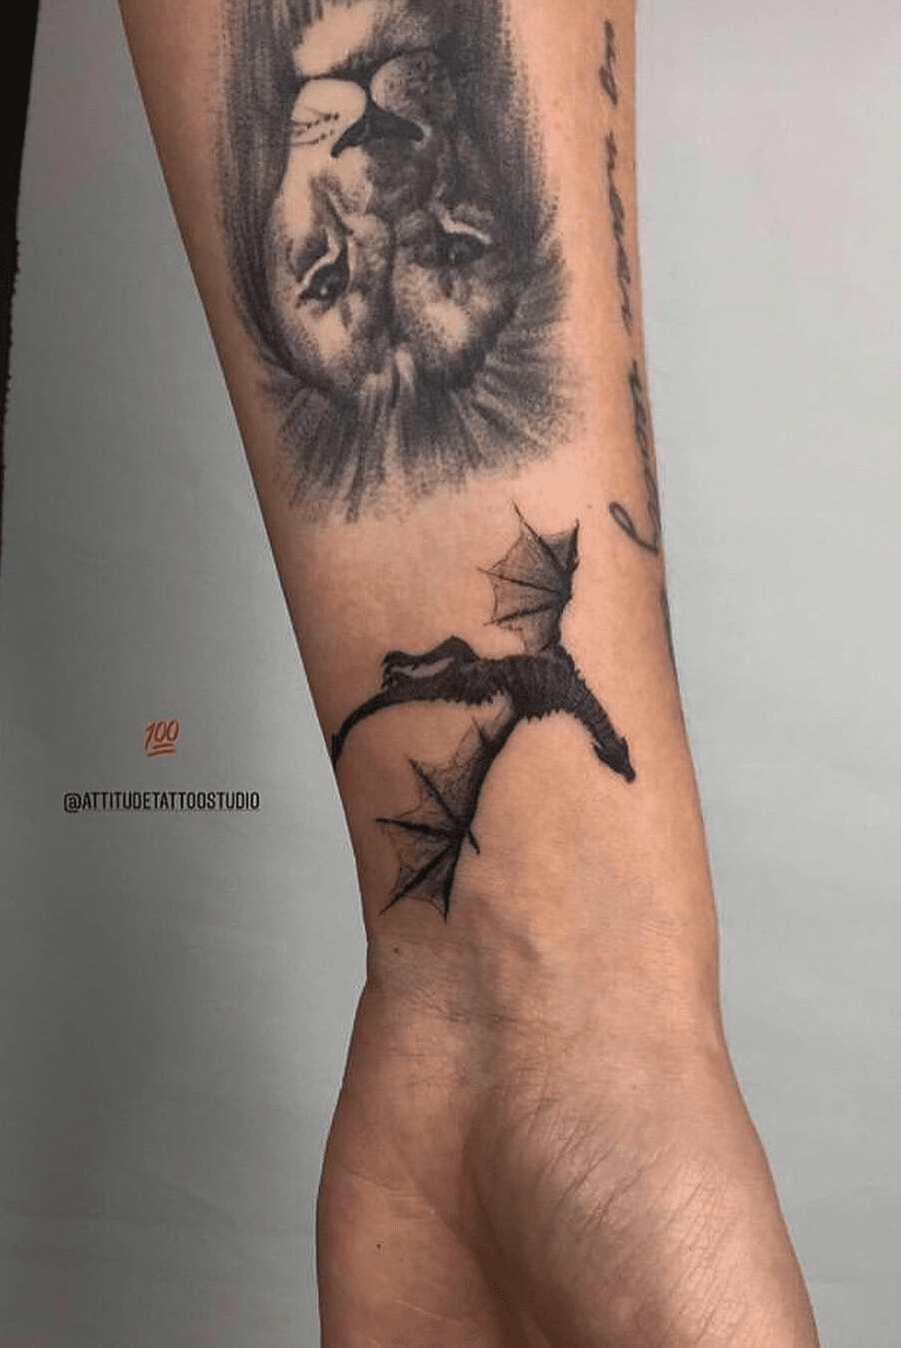 Drogon  Game of Thrones  Tattoo Comission  Game of thrones tattoo Drogon  game of thrones Dragon tattoo designs